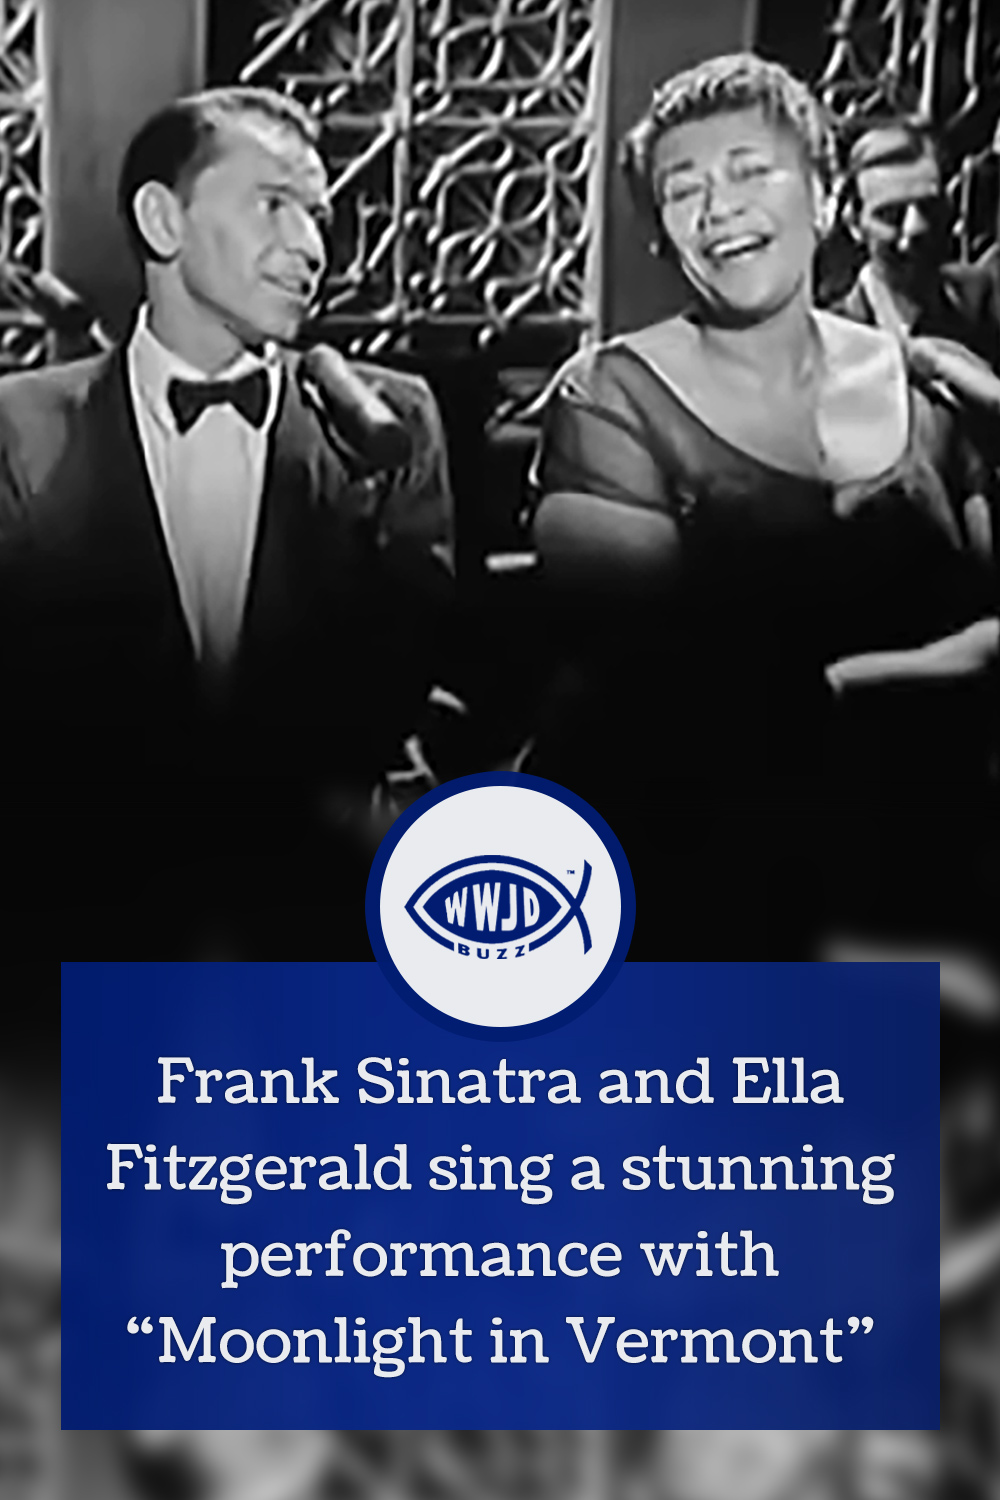 Frank Sinatra and Ella Fitzgerald sing a stunning performance with “Moonlight in Vermont”